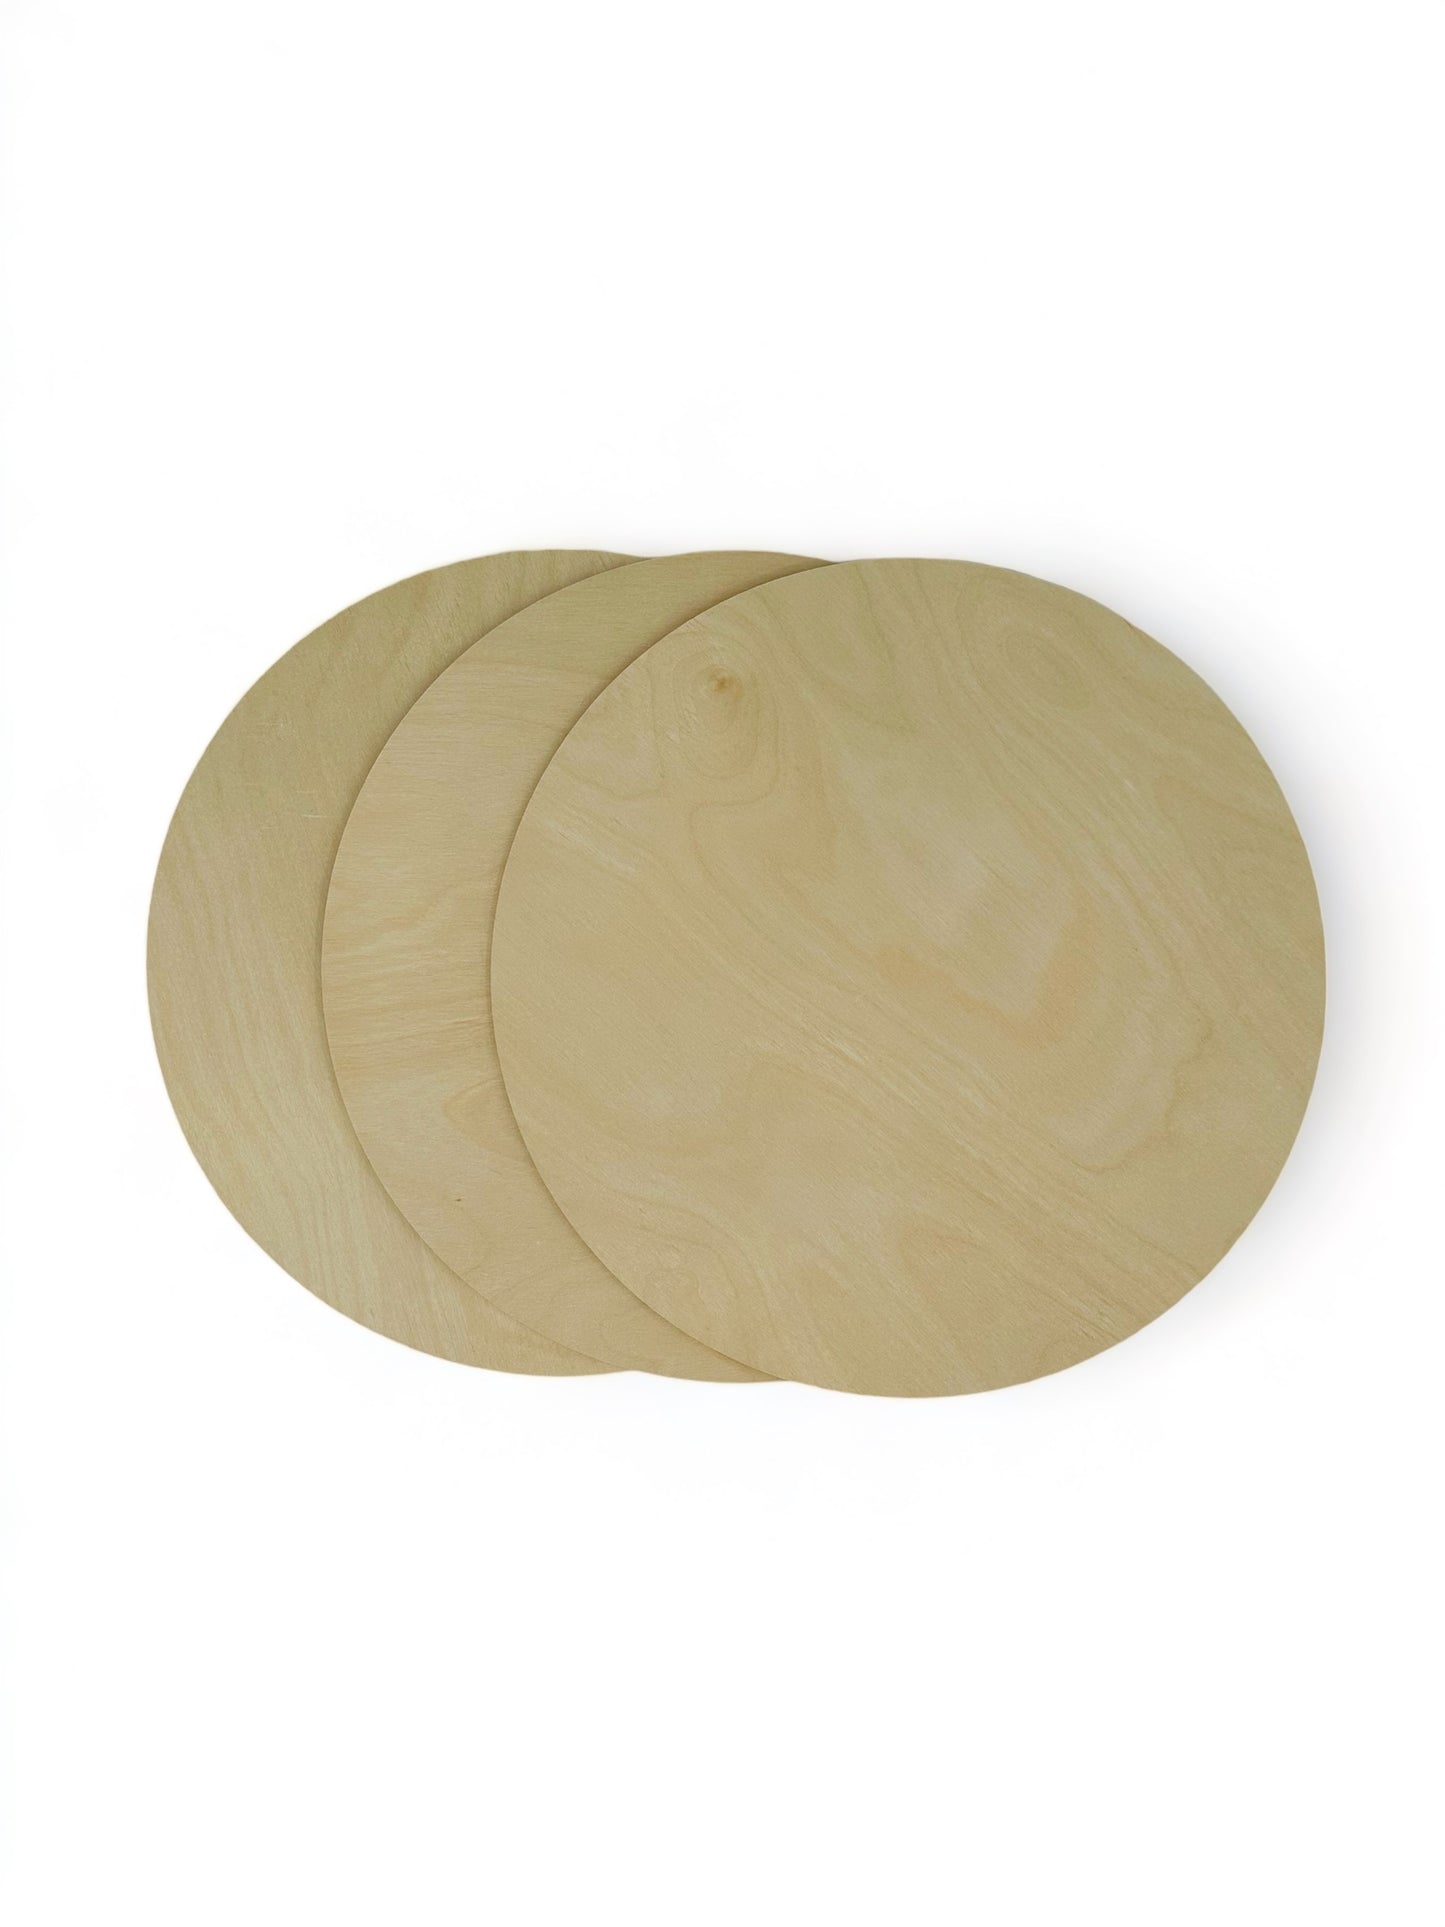 Birch Craft Delight: 12-Inch Bundles of Birch Plywood Crafting Round Cutouts - 1/2-Inch thick for art, decorating, and DIY projects